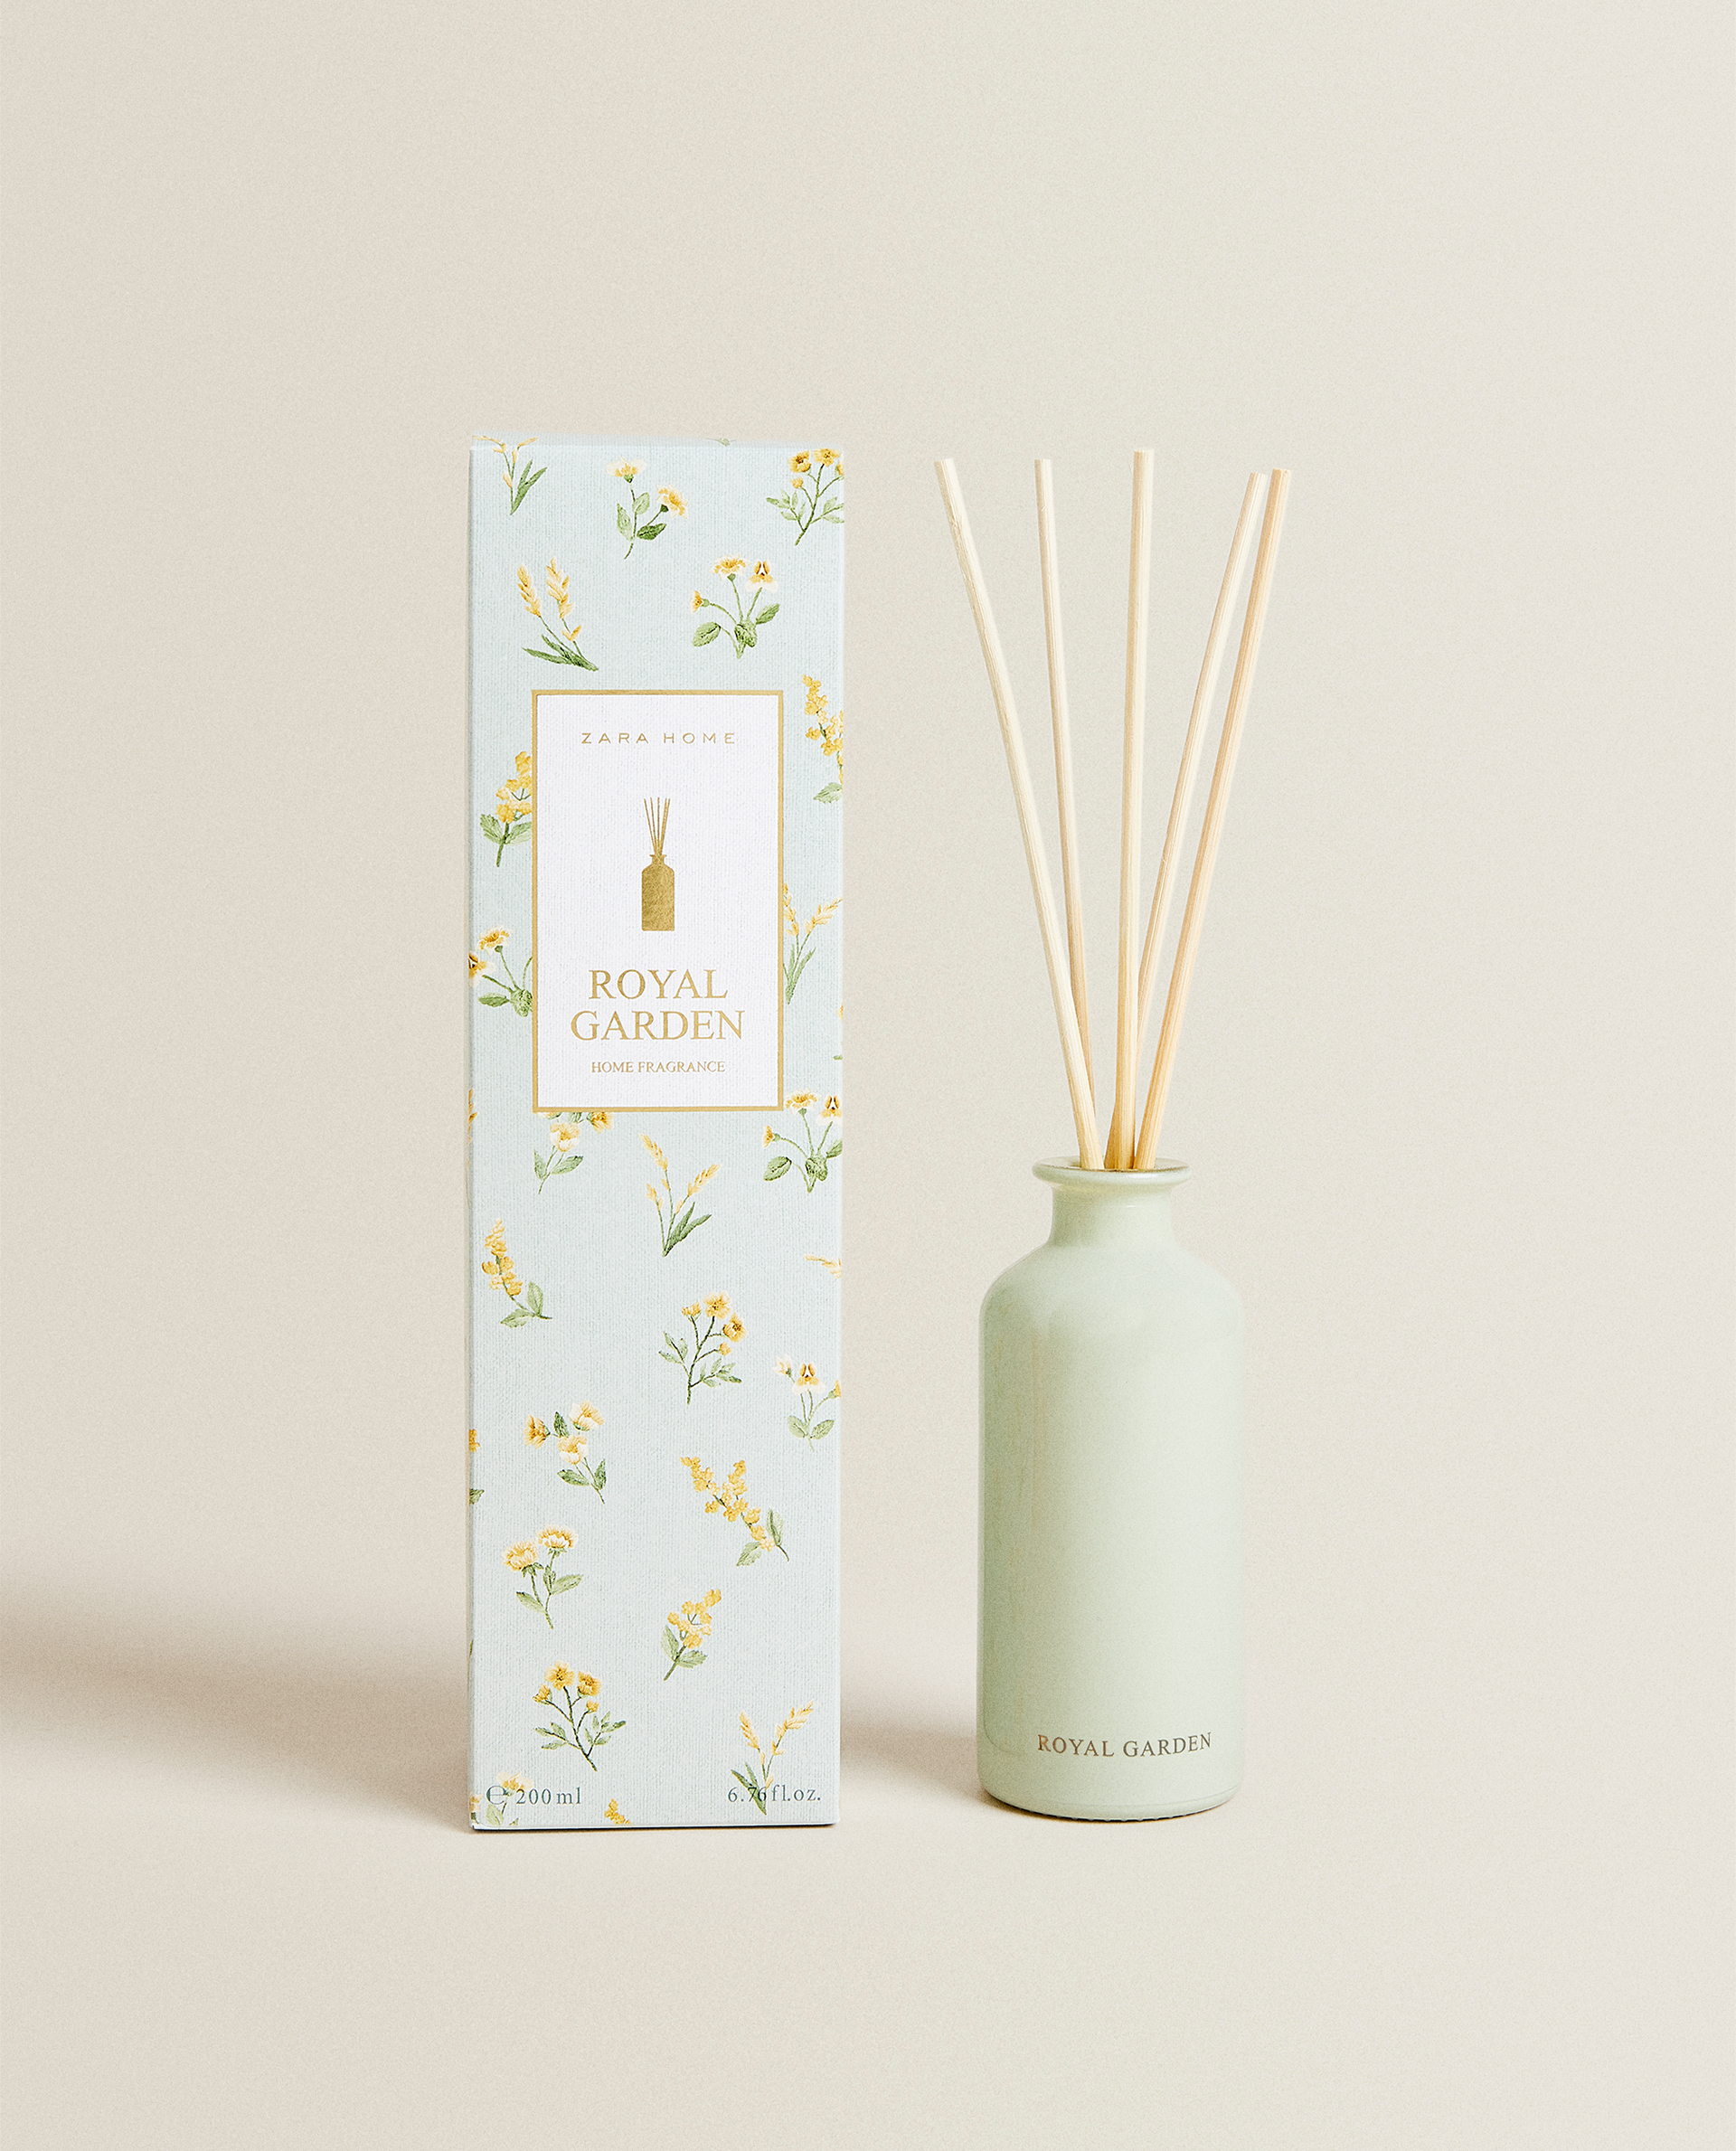 arv Numerisk Træde tilbage 200 ML) GARDEN REED DIFFUSER - Reed diffusers - PRODUCTS - FRAGRANCES - NEW  COLLECTION | Zara Home Jordan